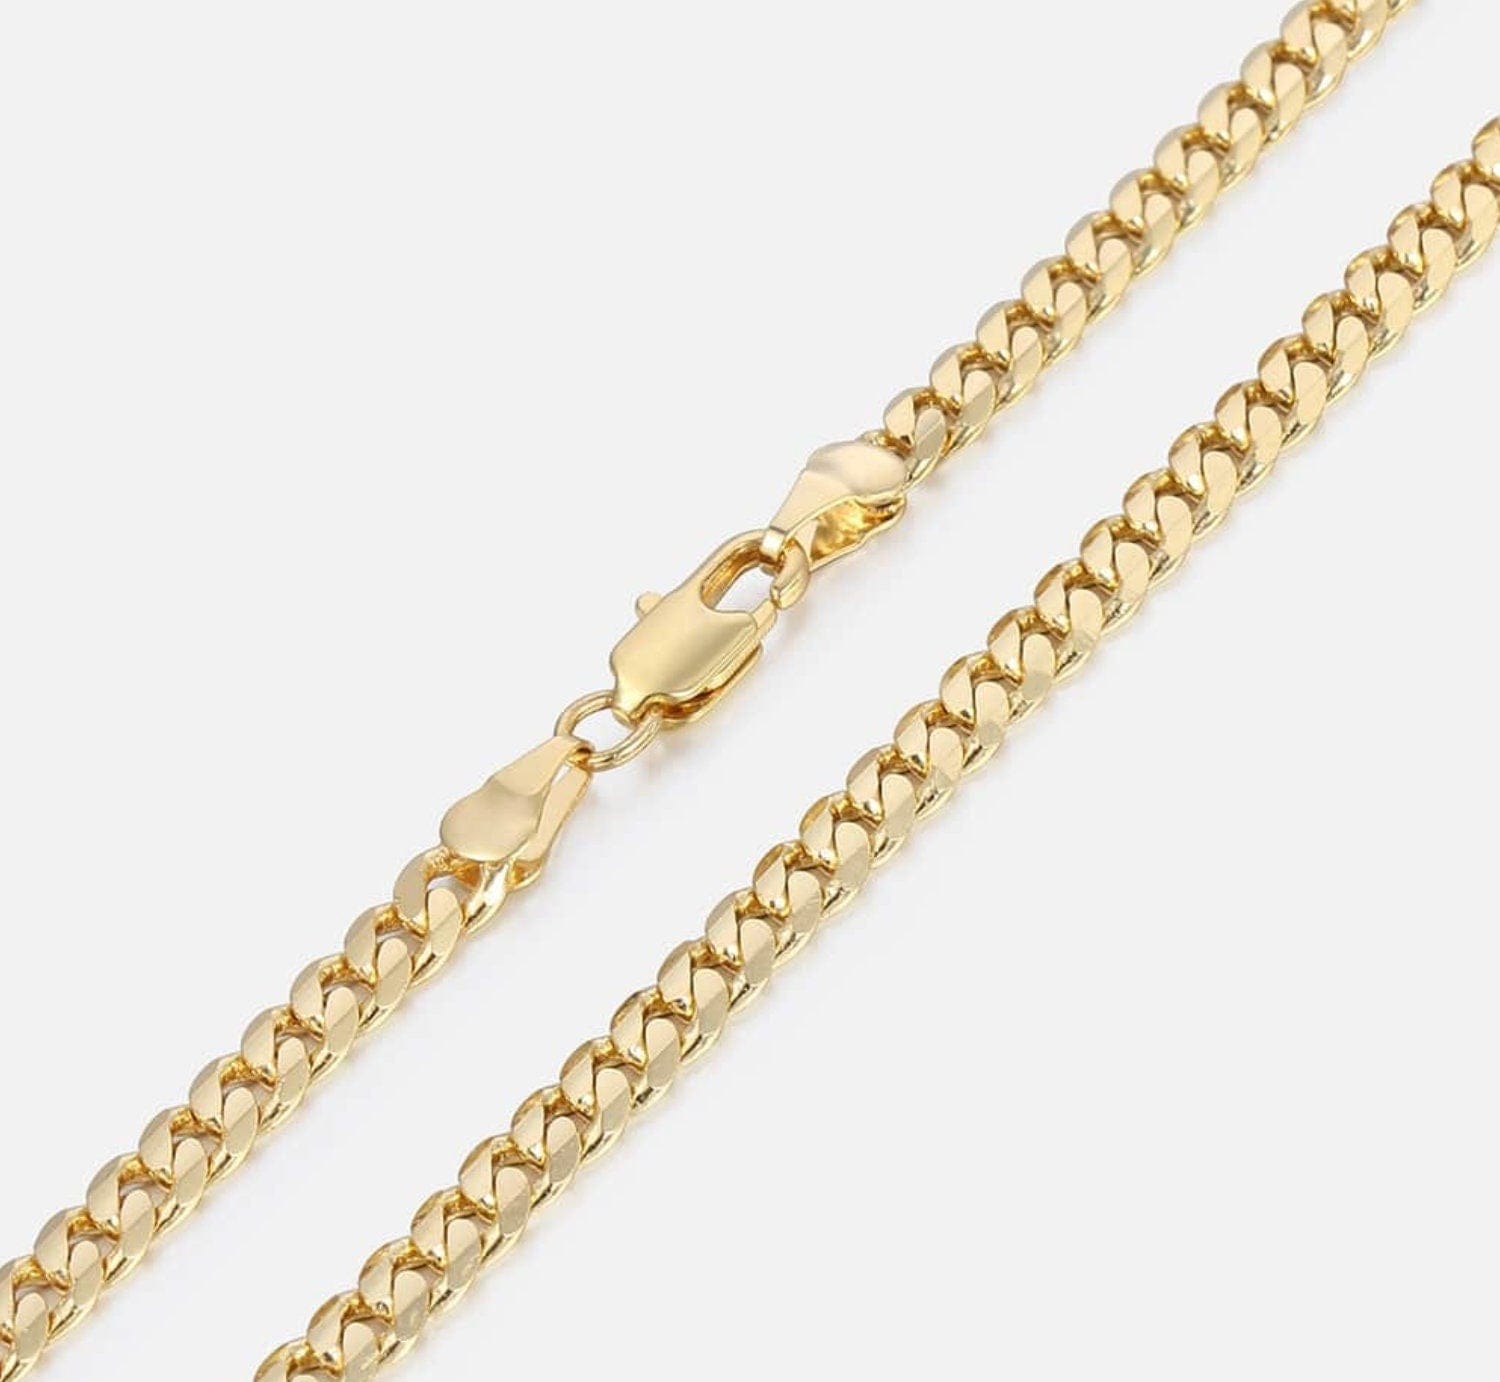 5MM Gold Cuban Link Chain Necklace for Men - 22in Stainless Steel Hip Hop Necklace - High Shine No Tarnish Water Resistant Layering Chain